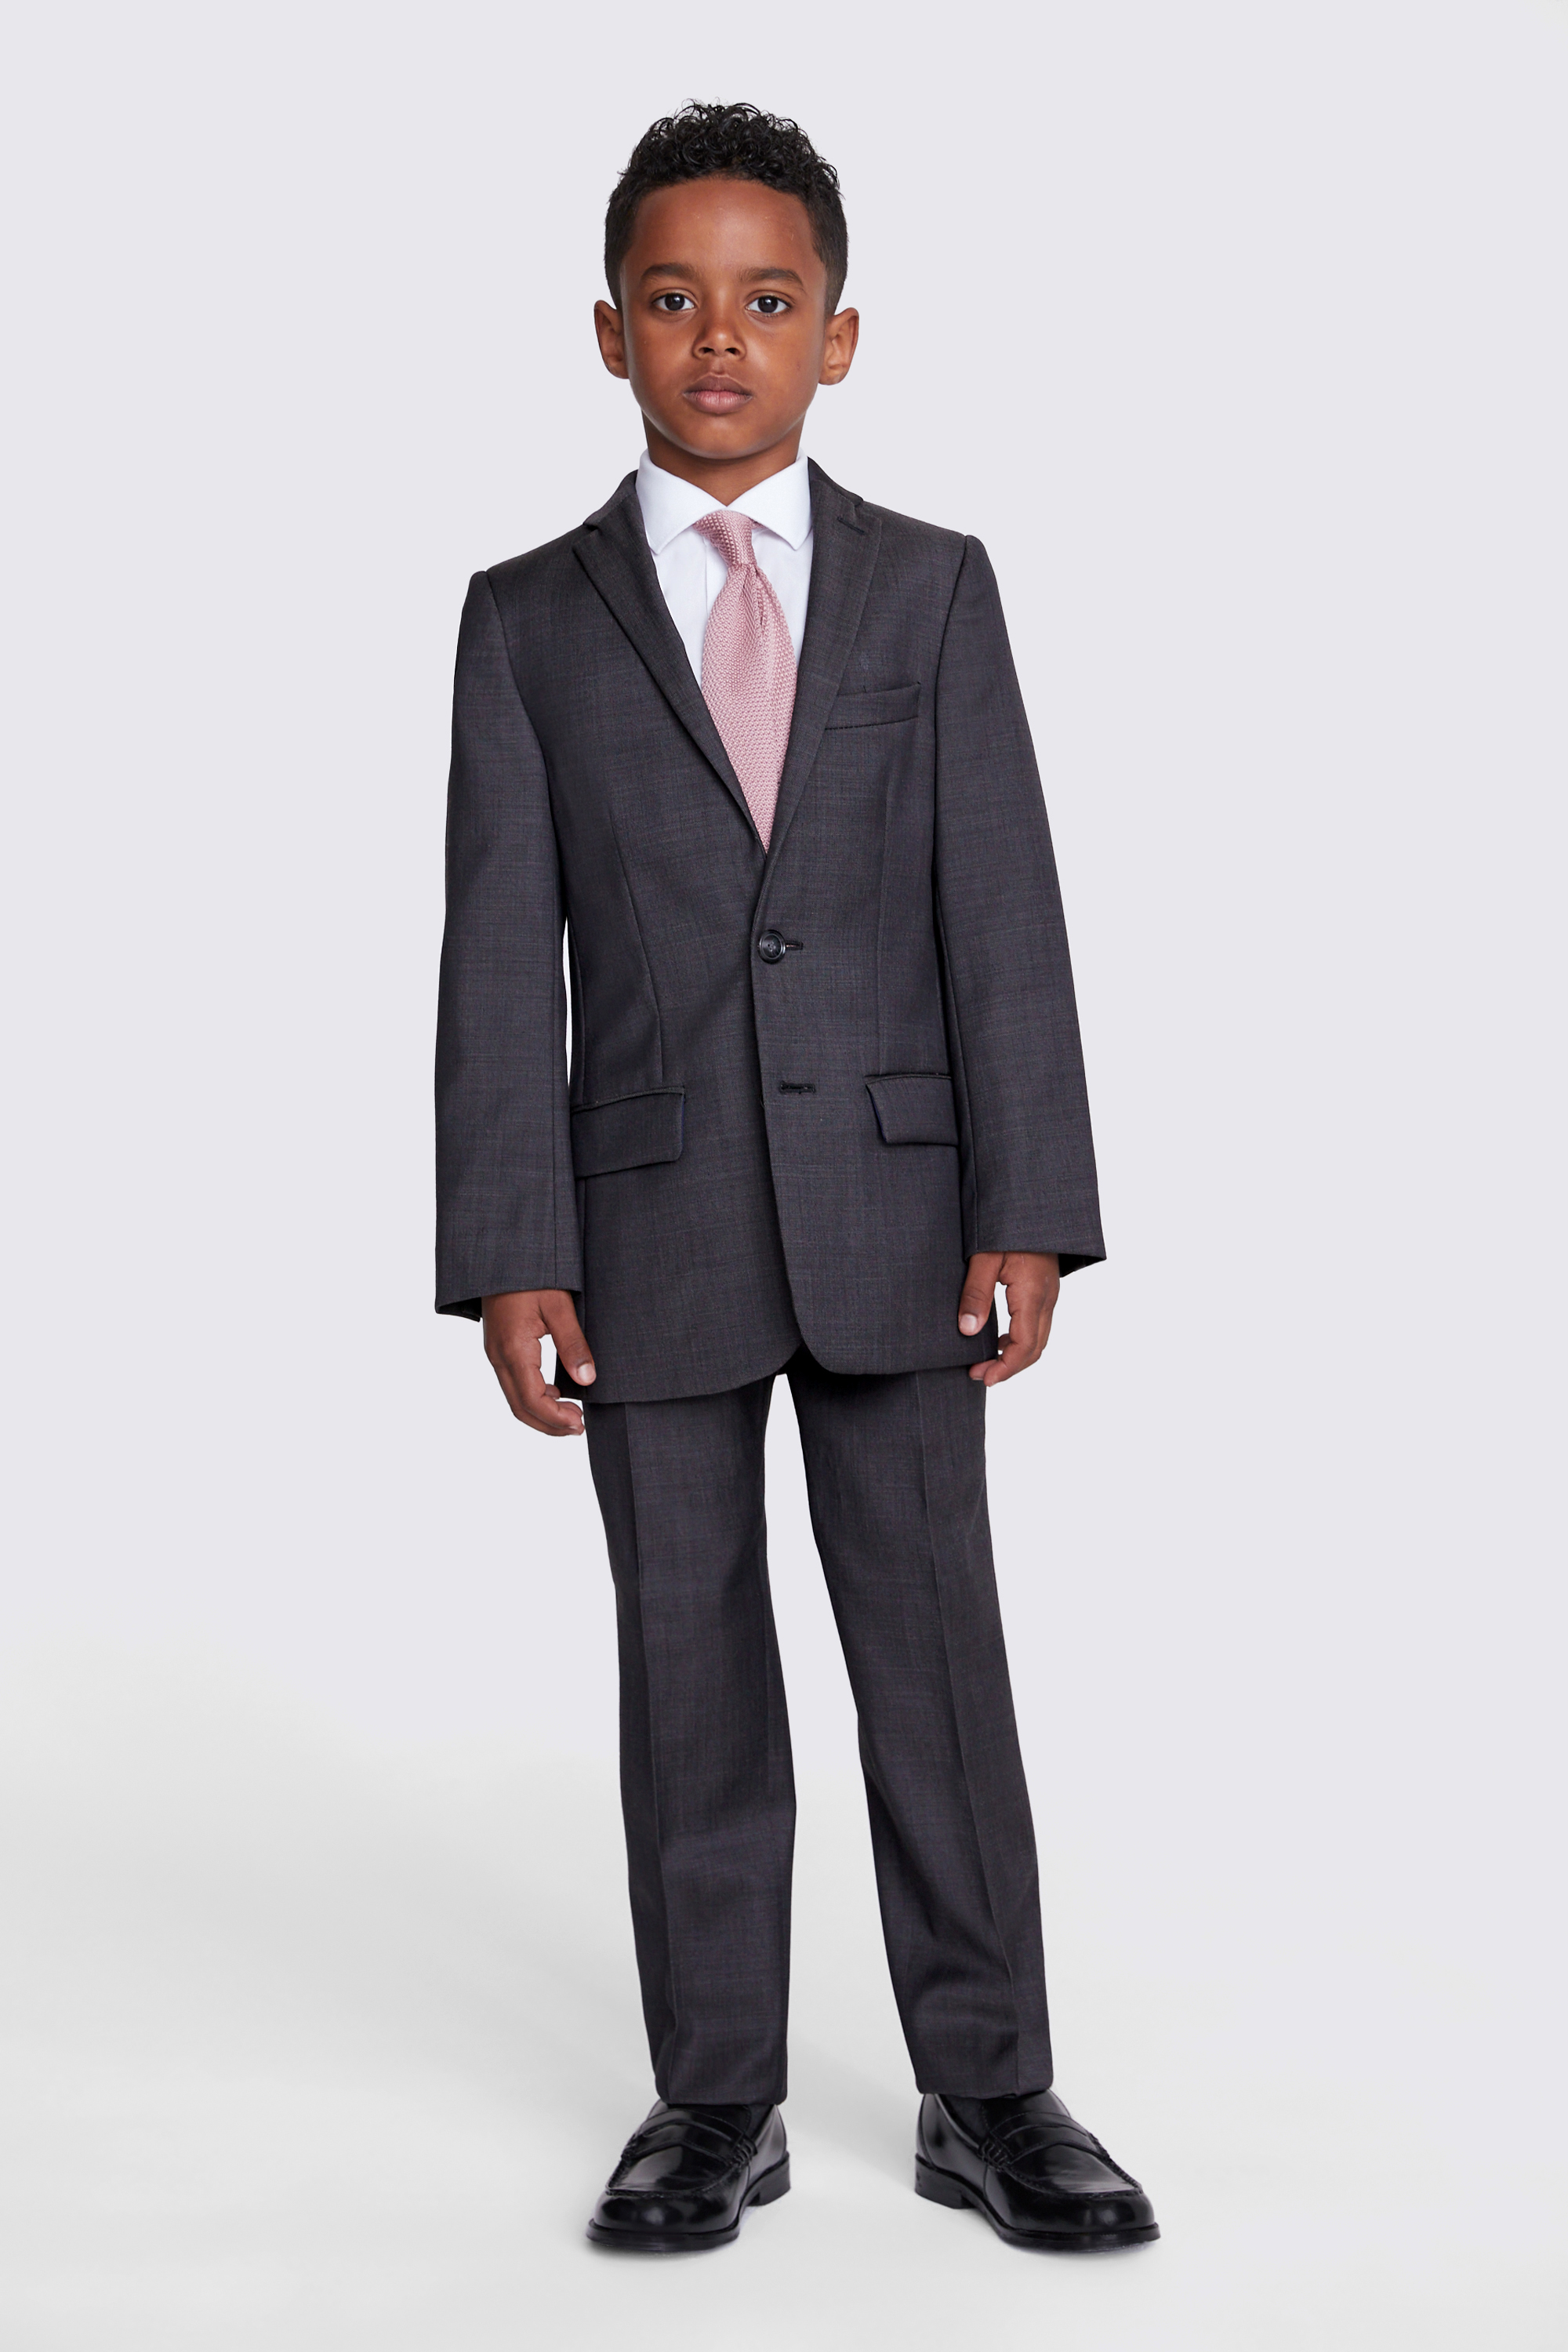 Ted Baker Boys Grey Pindot Suit for Hire | Moss Hire